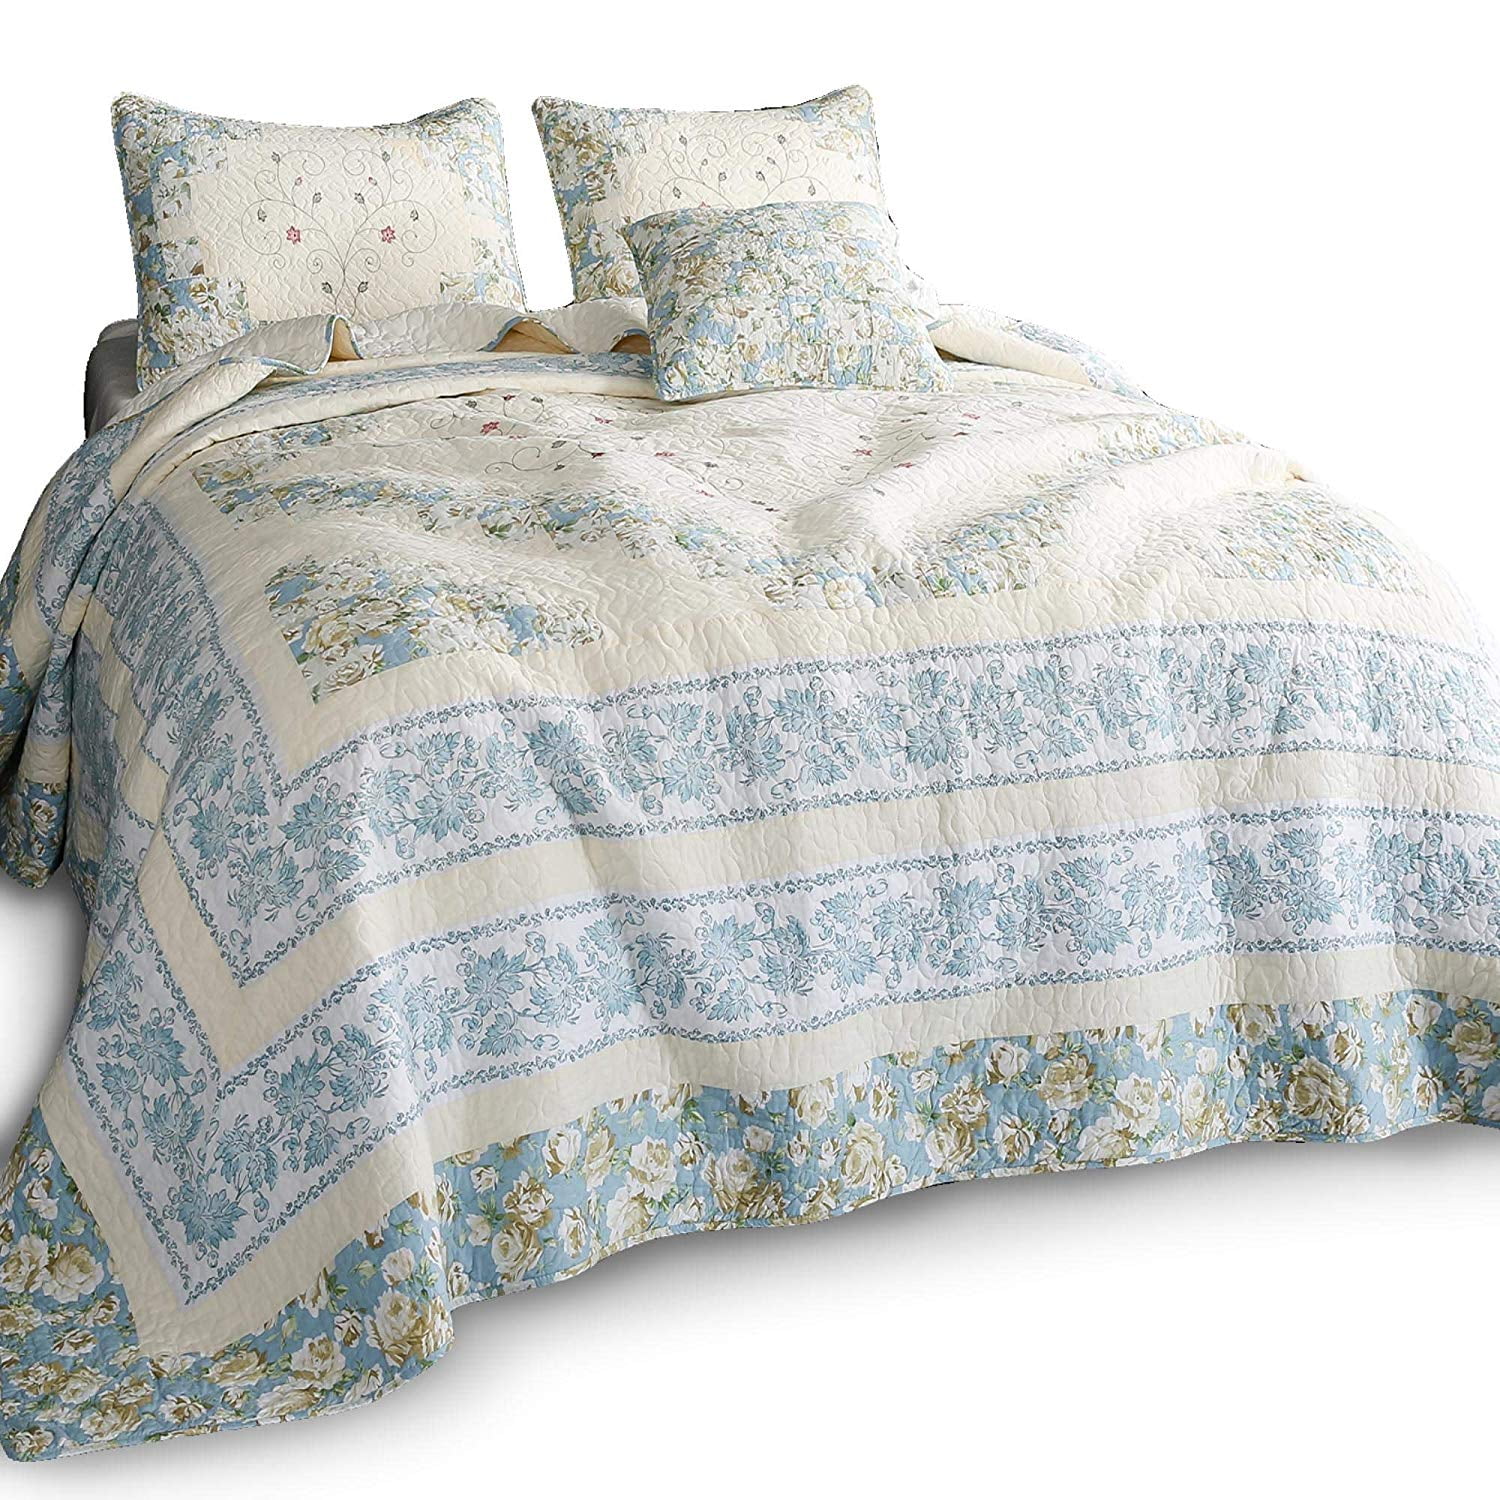 Kasentex Luxurious Quilted Patchwork Quilt Coverlet Bedspread